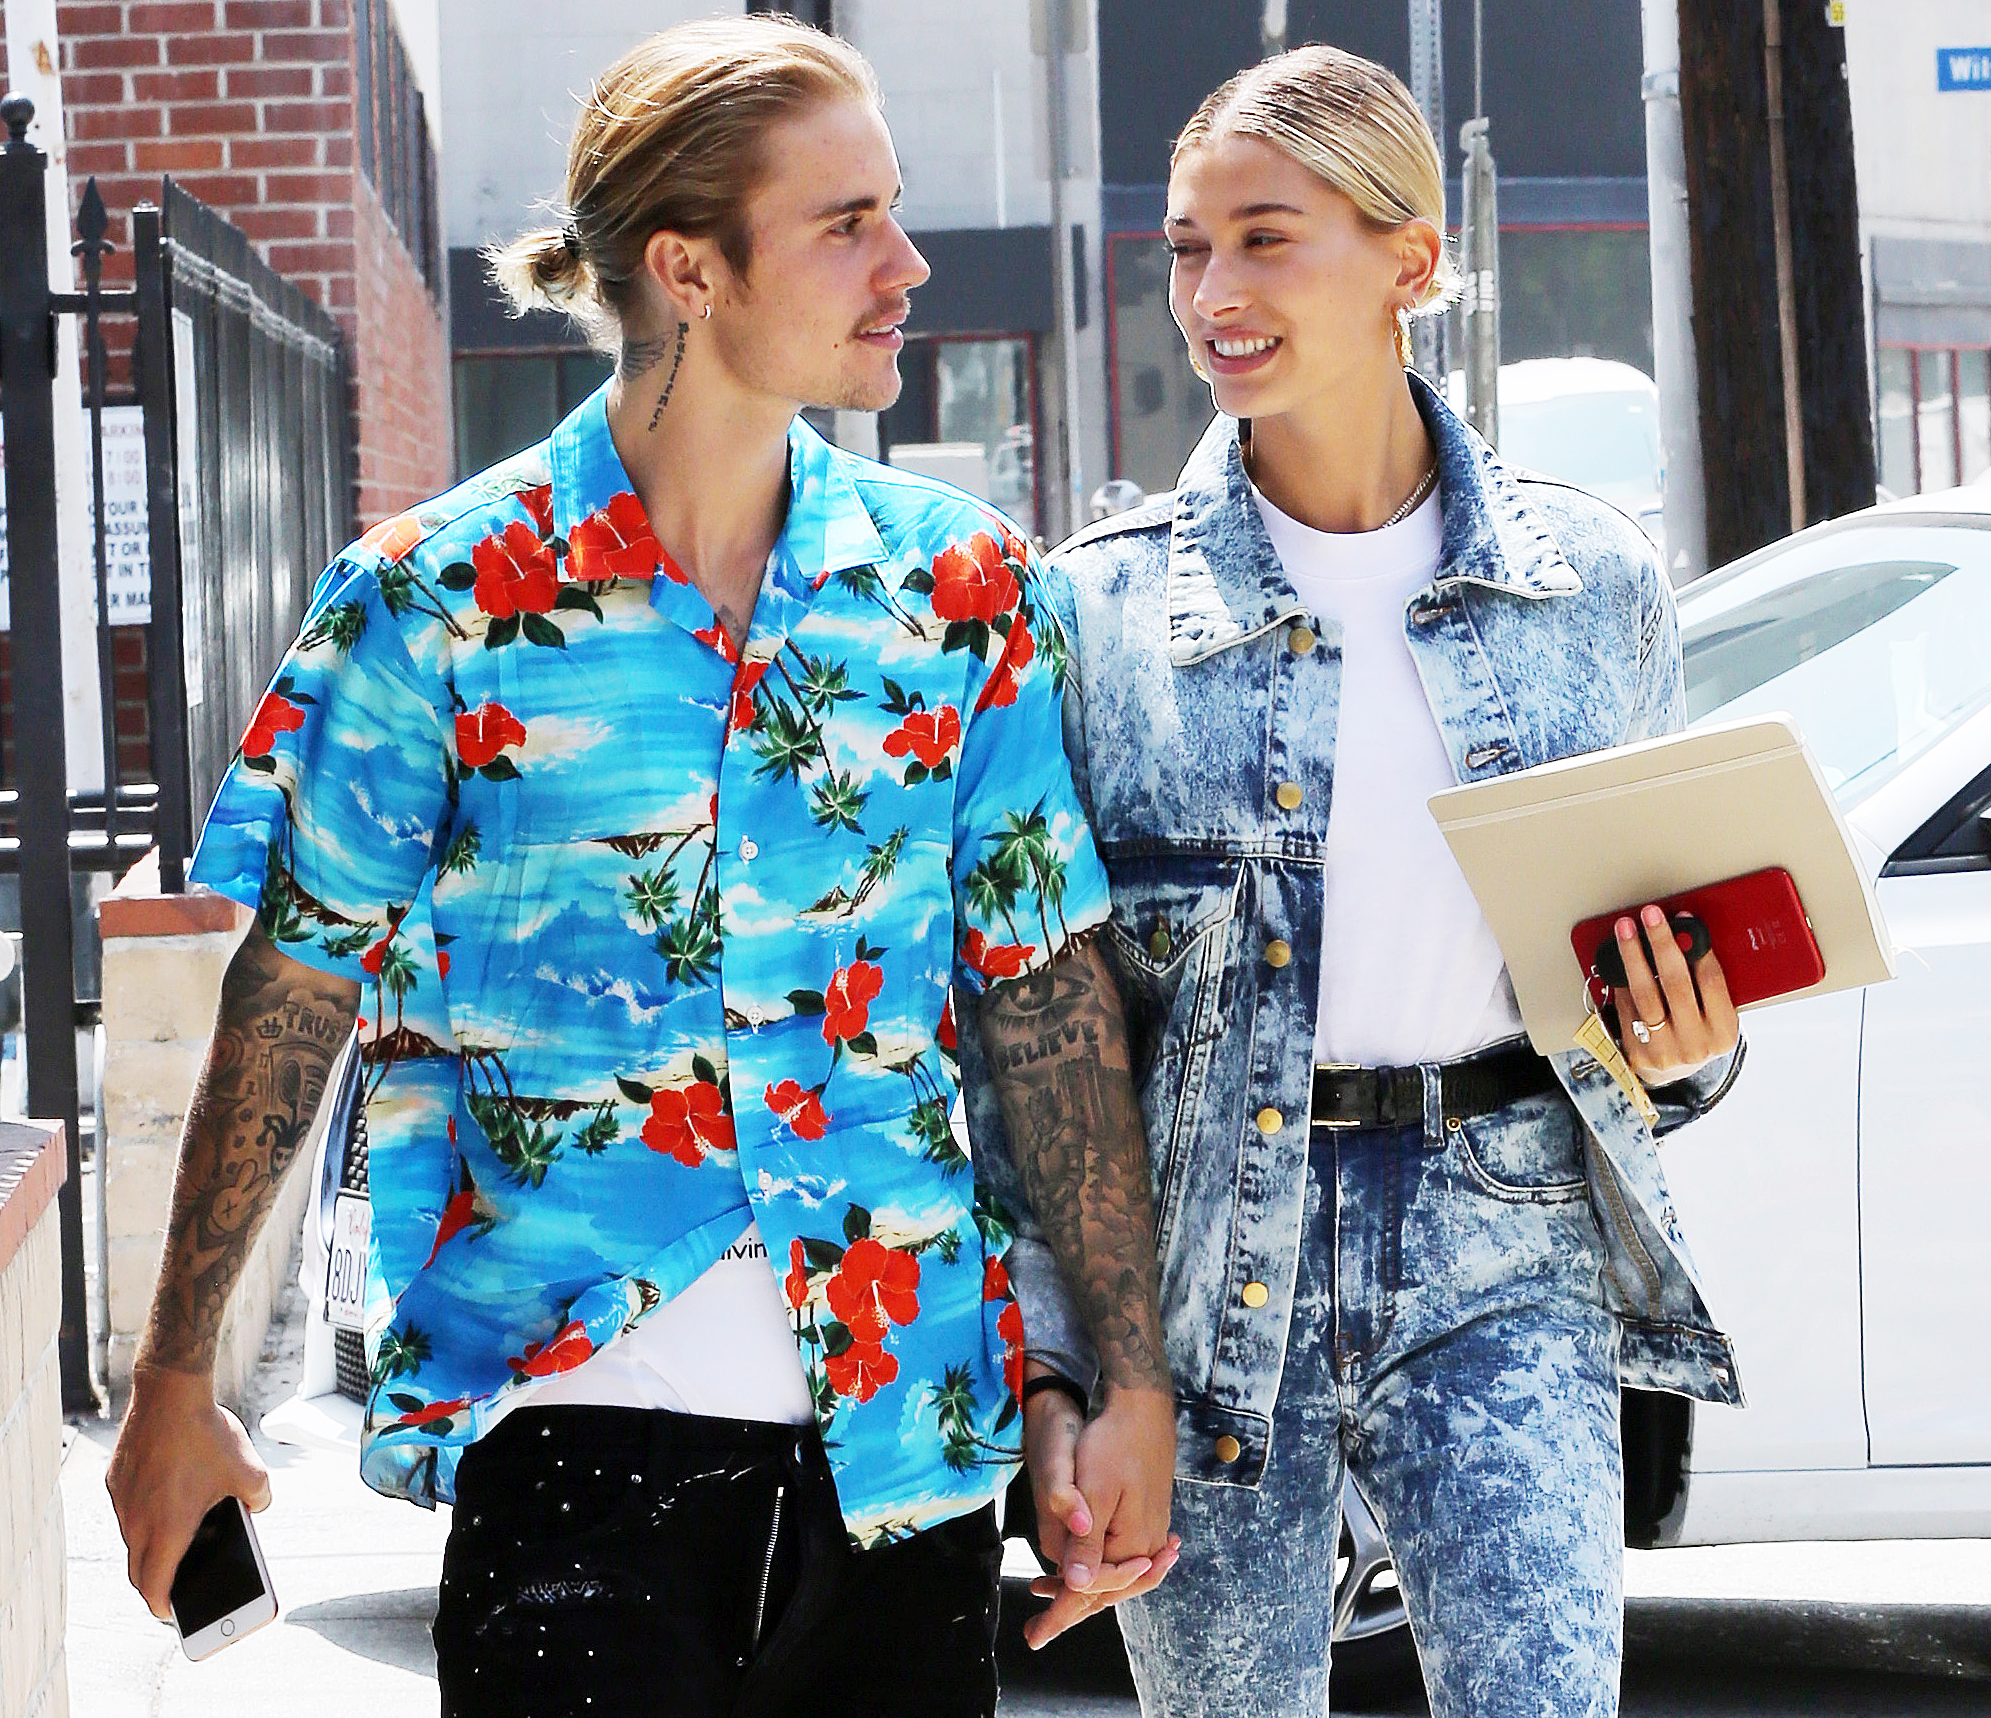 Justin Biebers Mom Posts Cryptic Tweet After Rumored Hailey